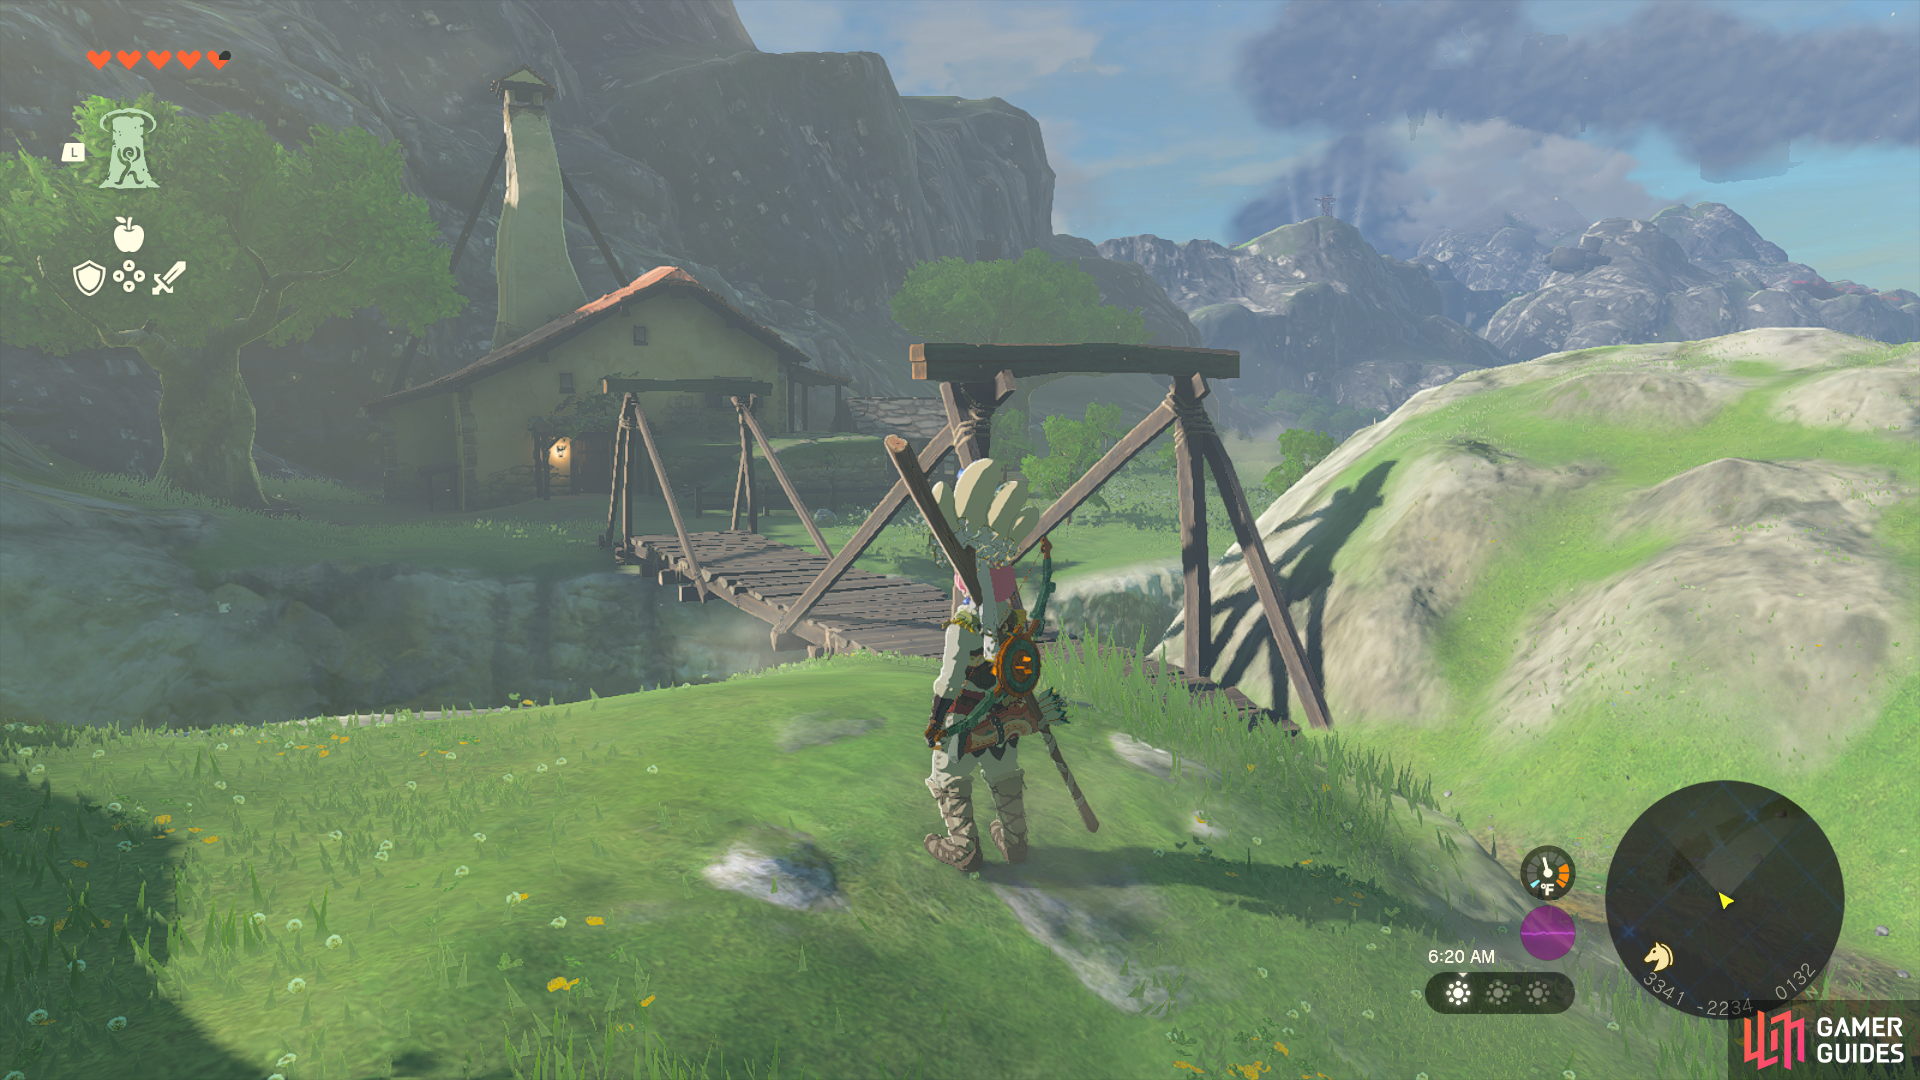 Zelda has moved into Link's house in Hateno Village.